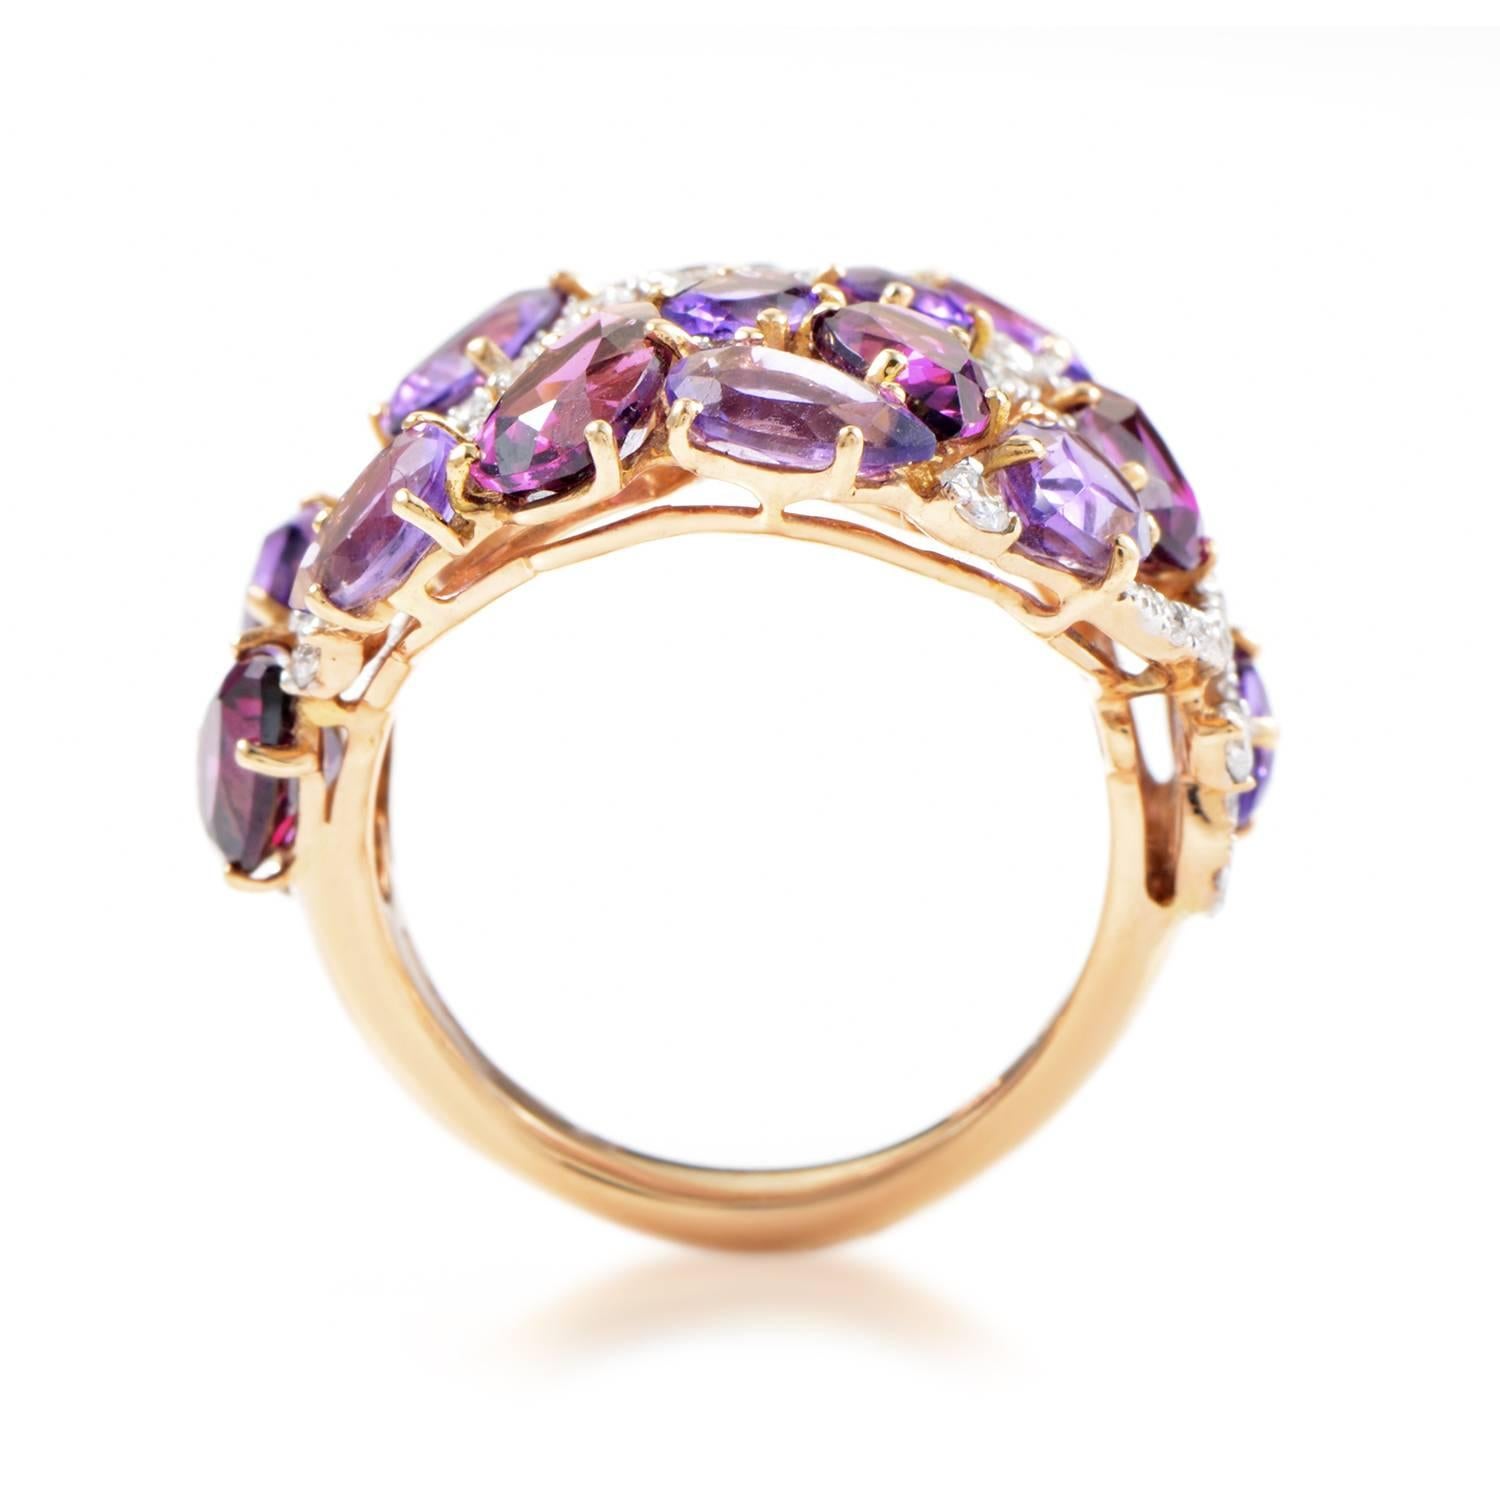 A majestic manifestation of exuberant glamour and feminine luxury, this spellbinding 18K rose gold ring from Casato boasts fascinating décor that combines glittering diamonds totaling 1.40 carats with delightful tourmalines and amethyst